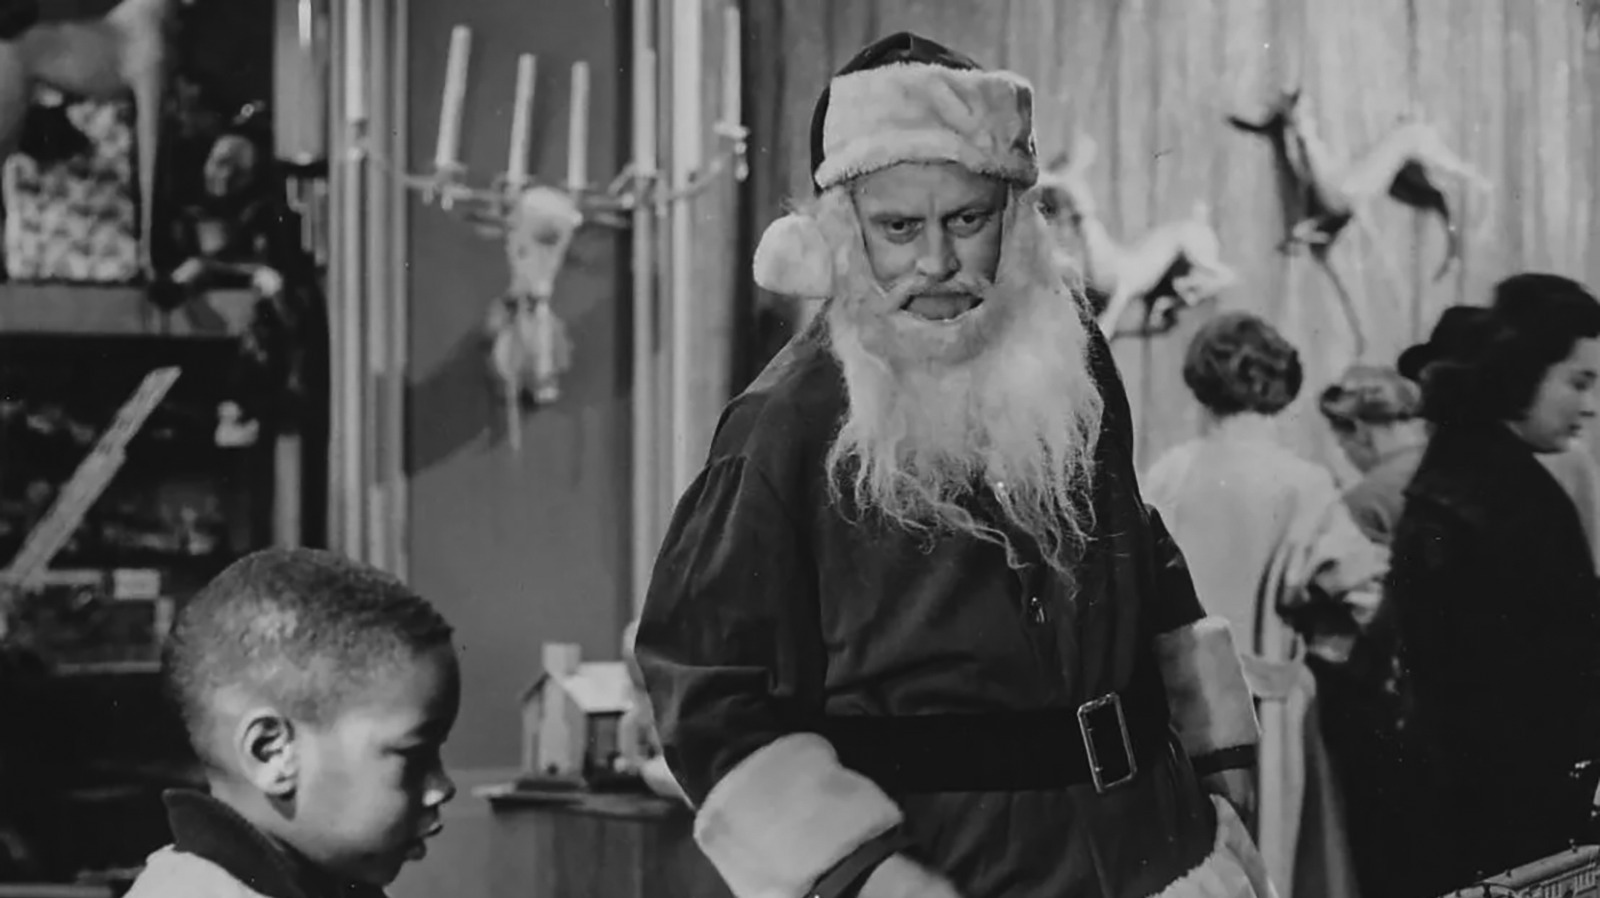 A Sweet Twilight Zone Episode About Santa Still Somehow Managed To Cause Controversy